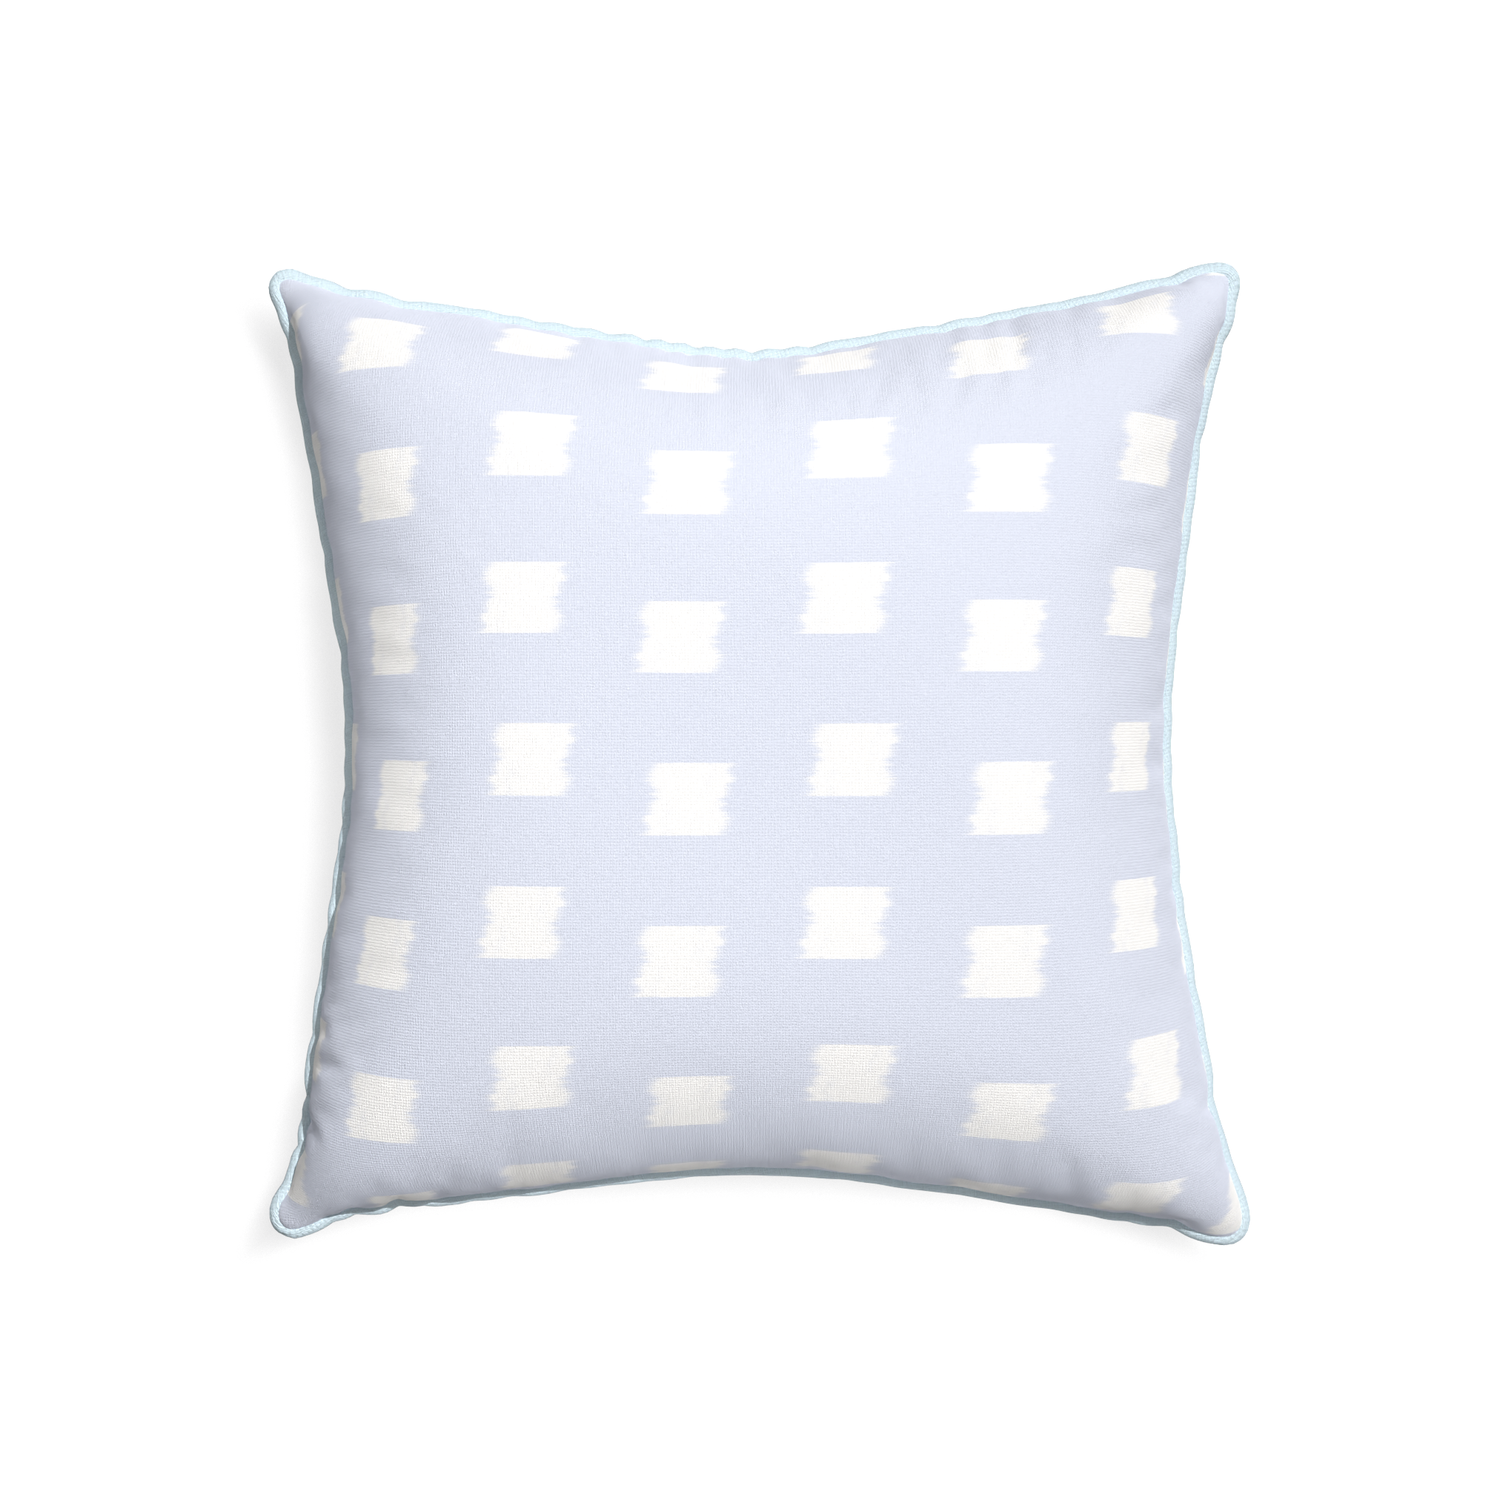 22-square denton custom sky blue patternpillow with powder piping on white background